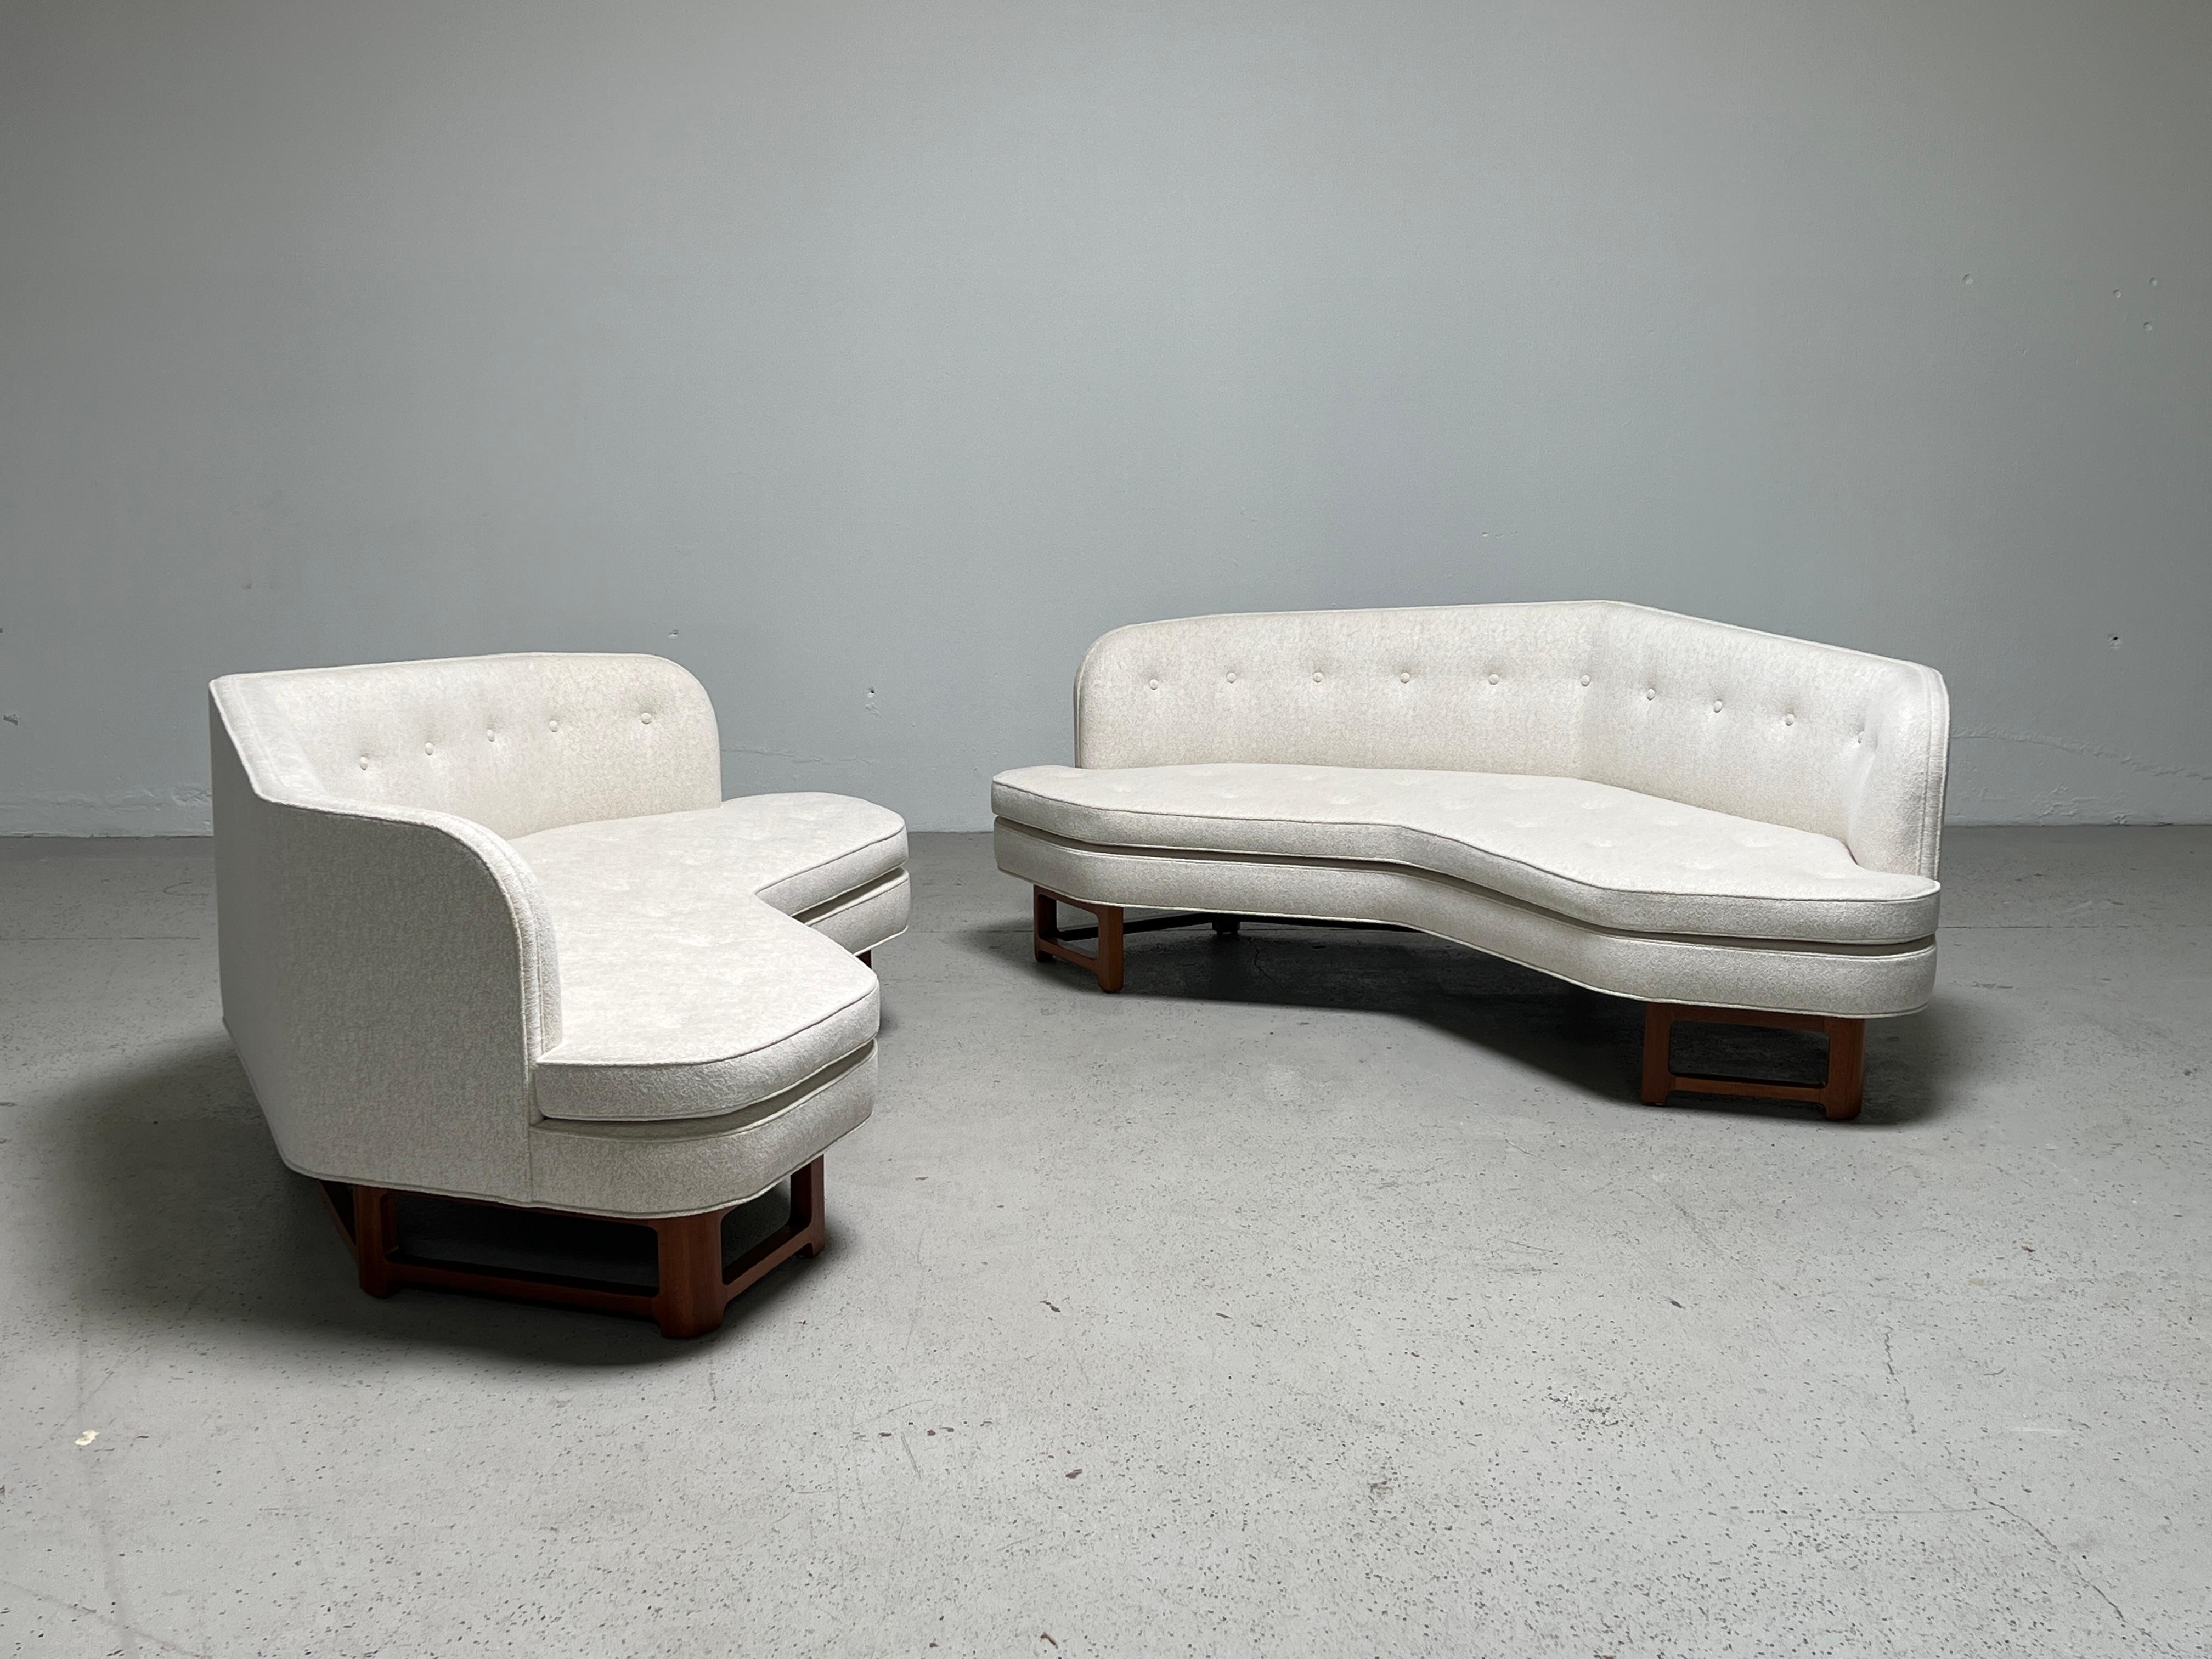 A matching pair of angled sofas designed by Edward Wormley for Dunbar. Beautifully restored with refinished mahogany bases and reupholstered in Larsen / Tsuga / Snow fabric.